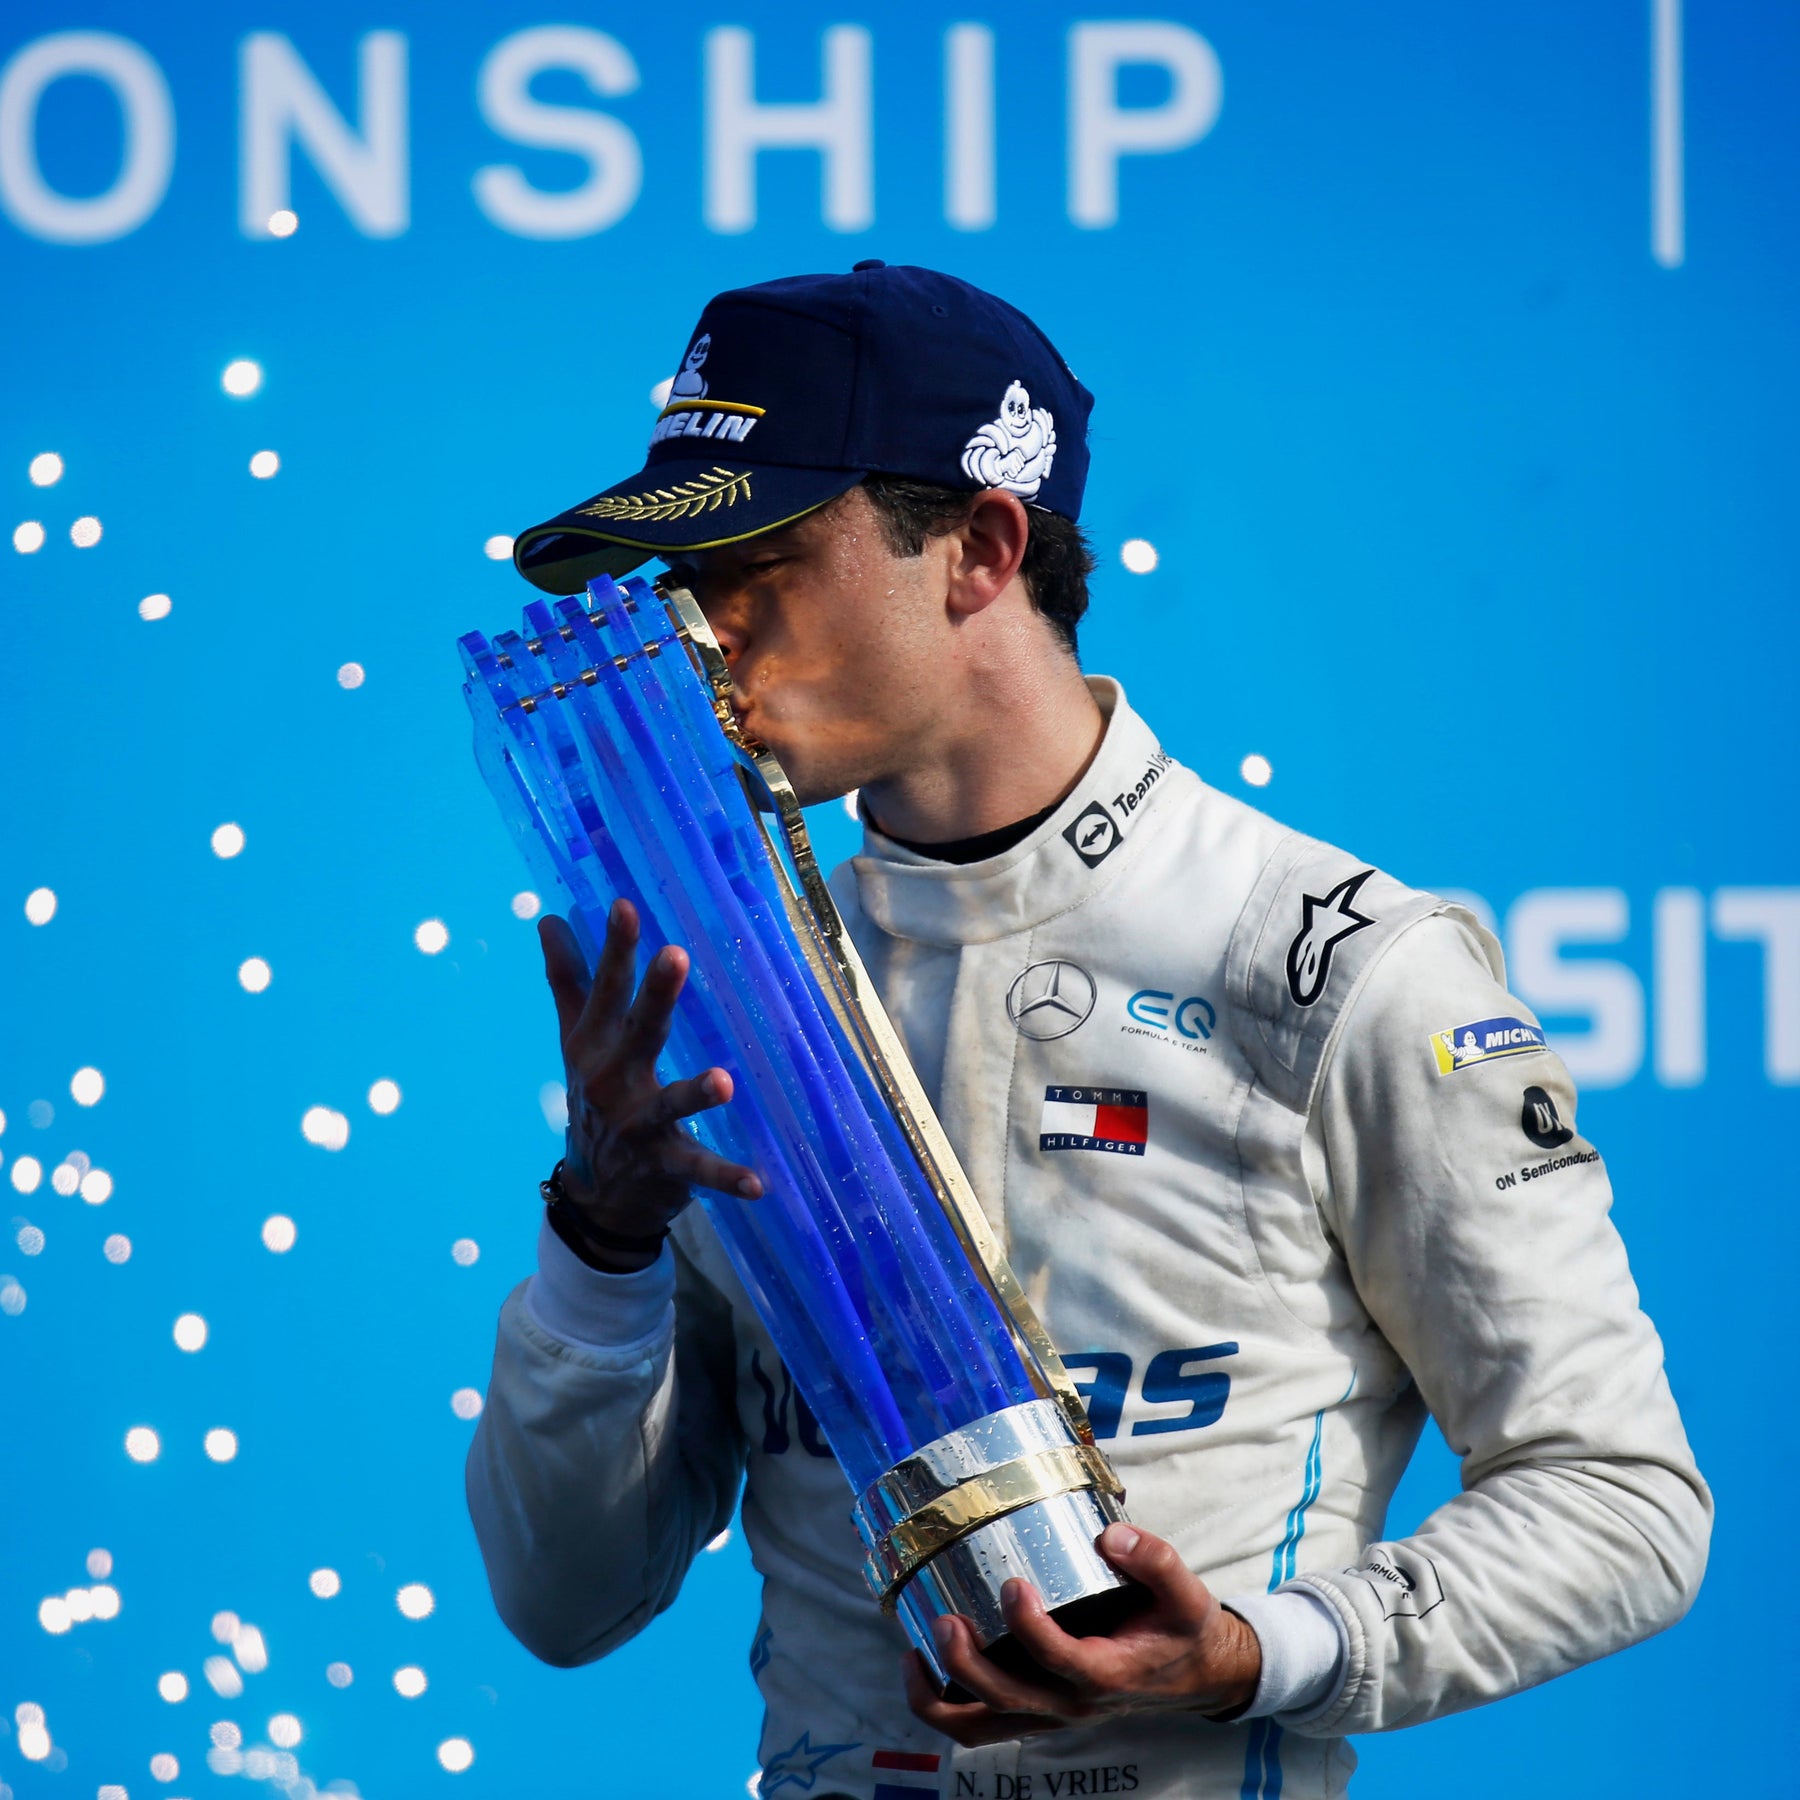 NYCK DE VRIES CROWNED 2021 FORMULA E CHAMPION AT SEASON FINALE IN GERMANY